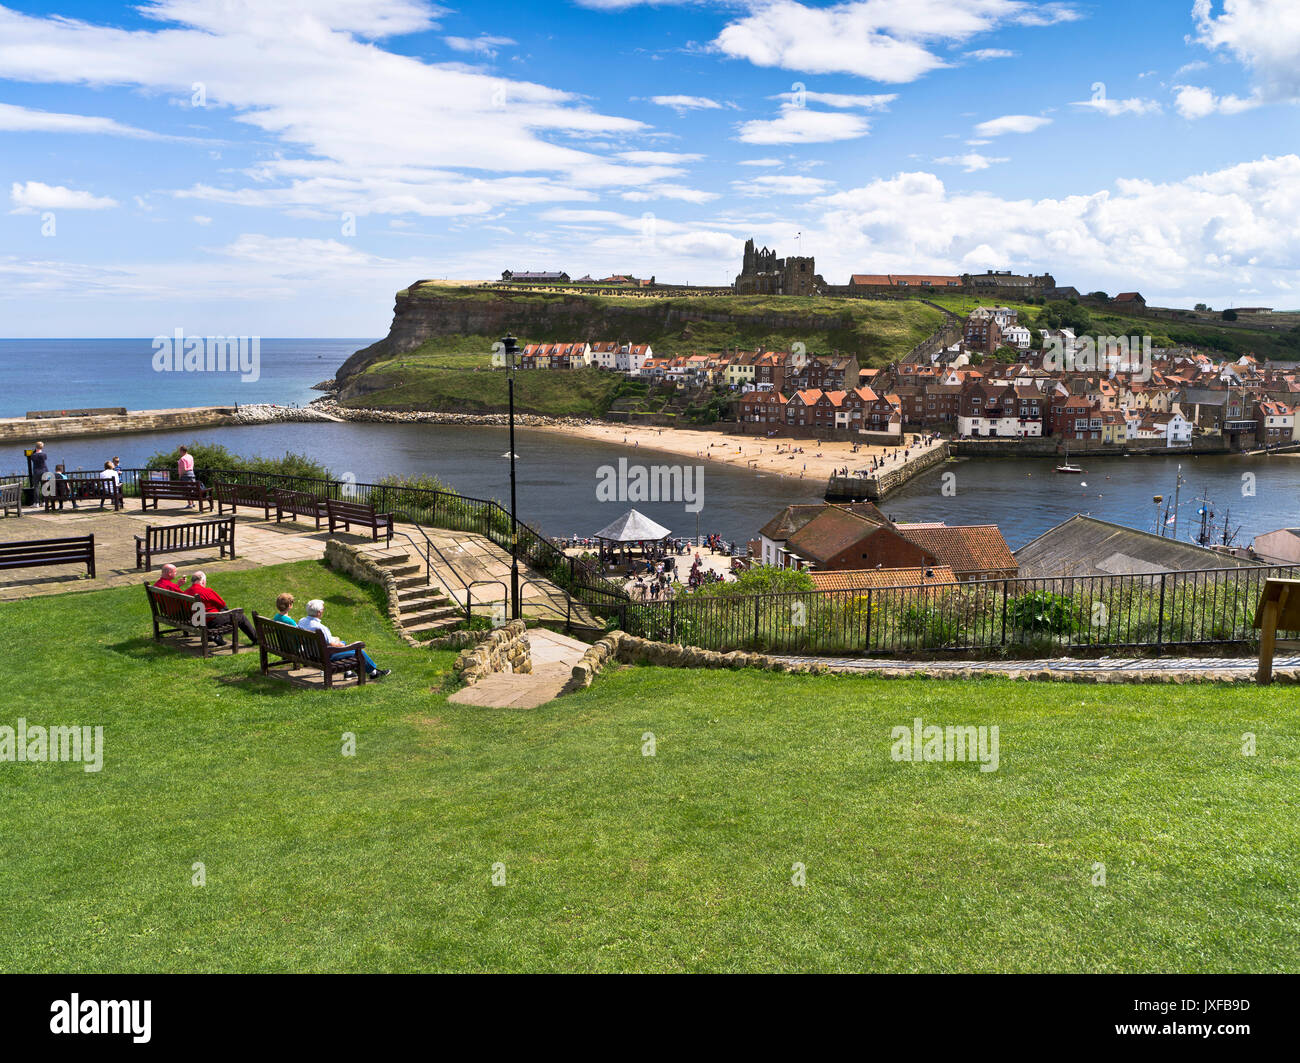 dh West Cliff town abbey coast WHITBY NORTH YORKSHIRE People couples sitting relaxing England tourists summers day tourism harbour Stock Photo